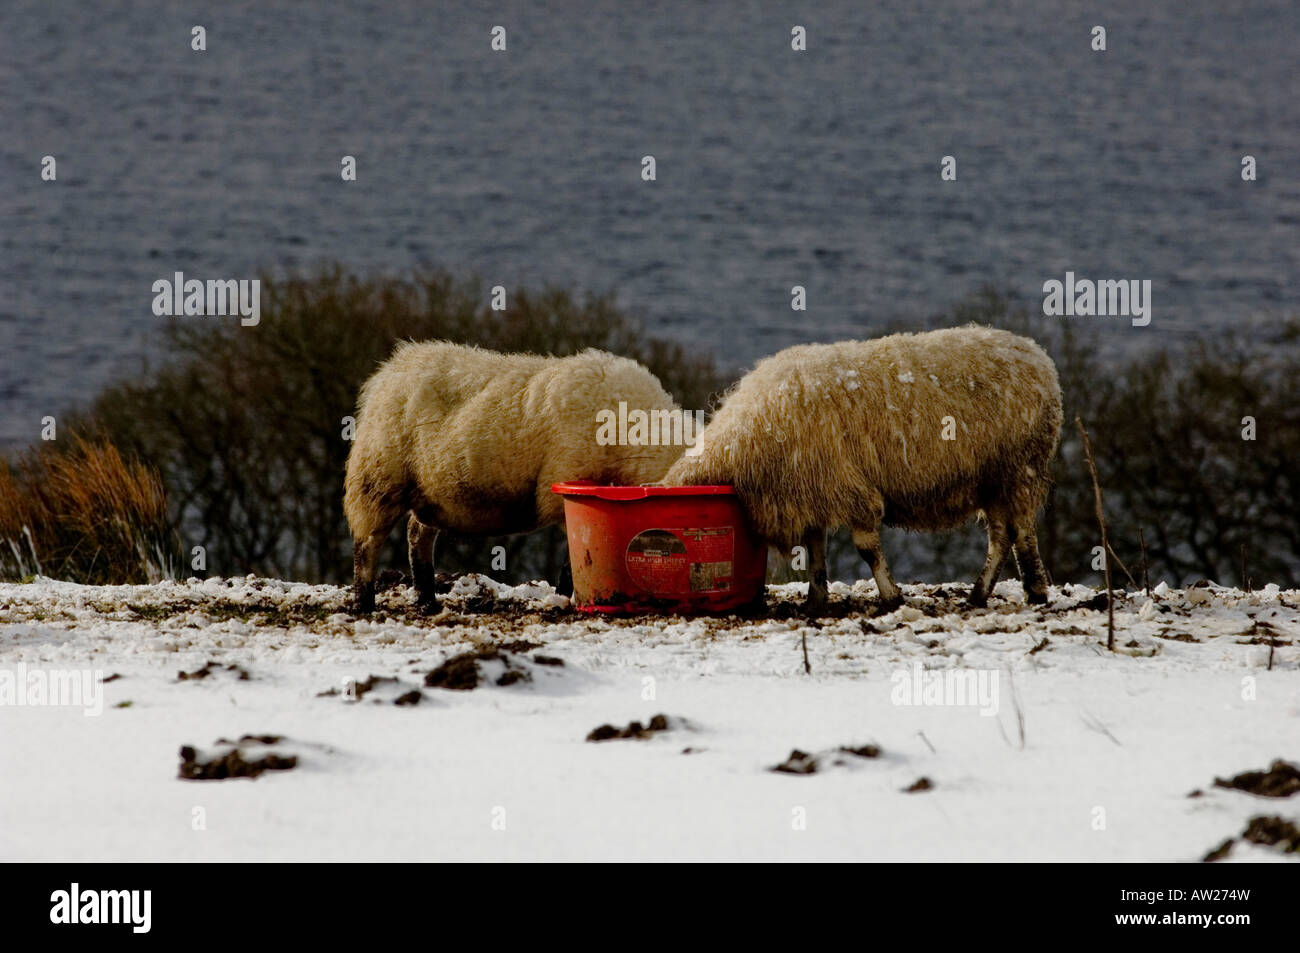 Two sheep eat feed from a bucket while a third looks on. With snow on the ground the animals require additional food. Stock Photo